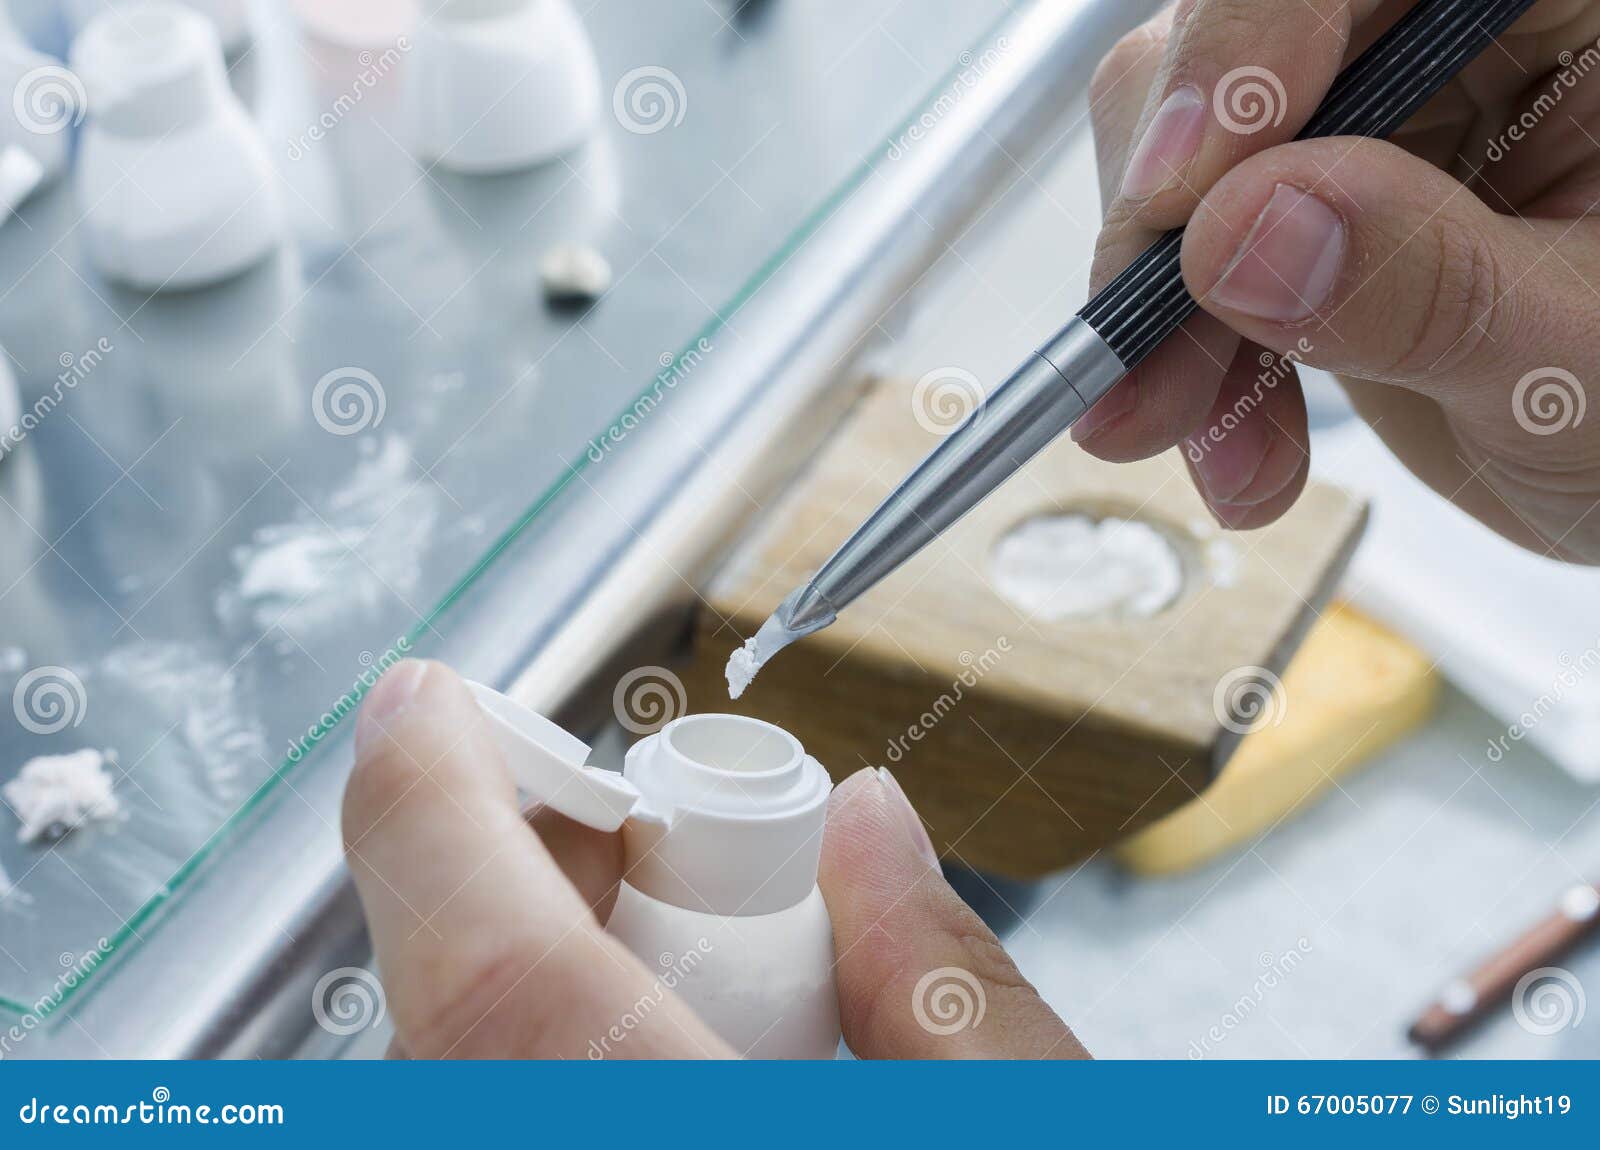 technician putting the ceramic material in powder in the glass.